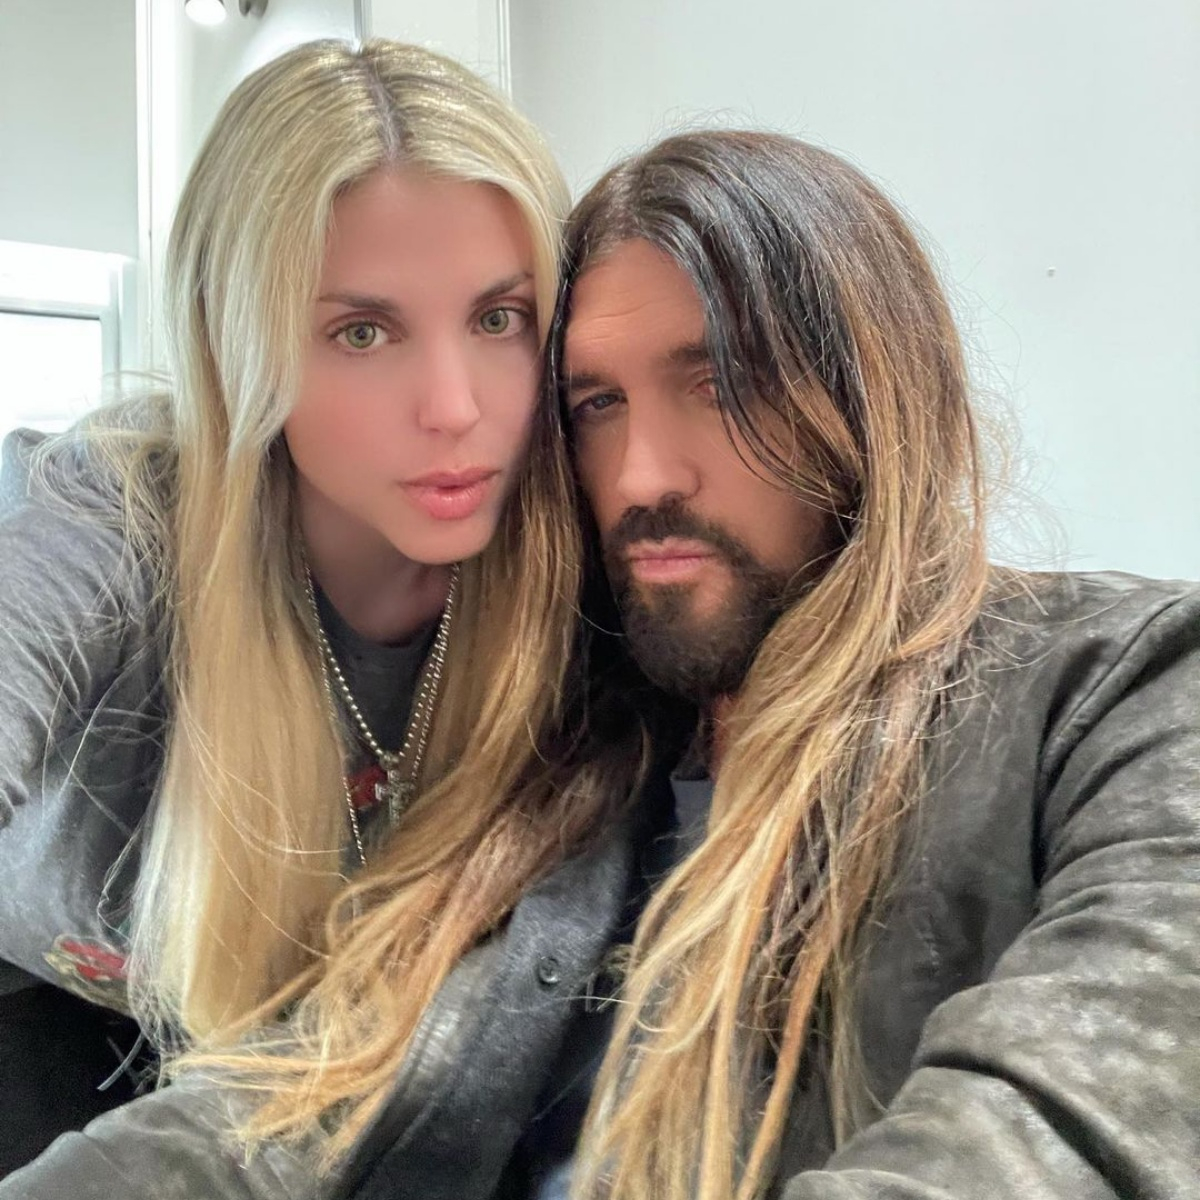 Billy Ray Cyrus and Fiancée Firerose Make Their Red Carpet Debut